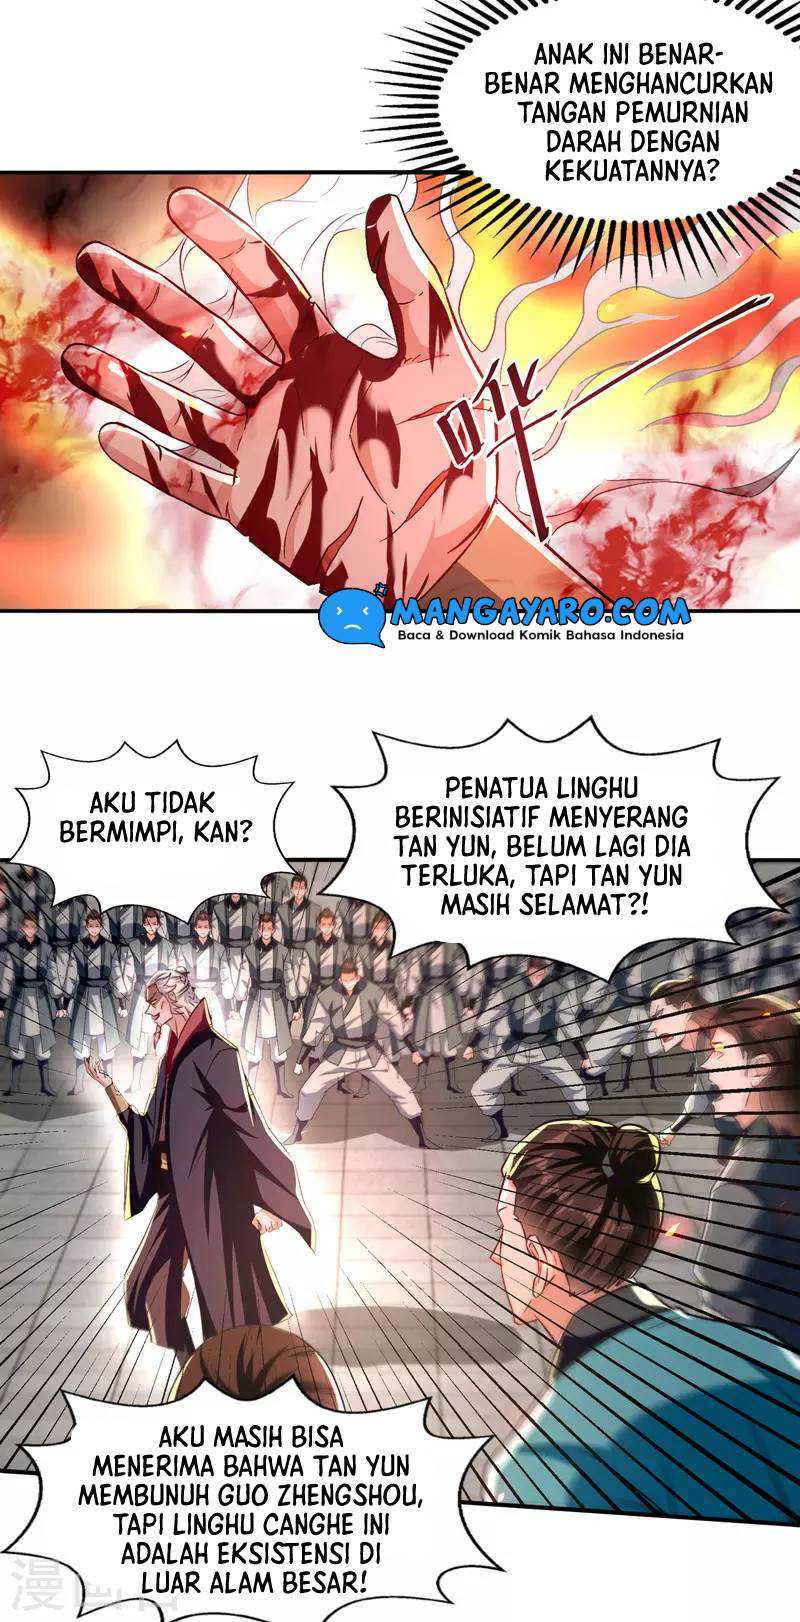 Against The Heaven Supreme (Heaven Guards) Chapter 84 - 175